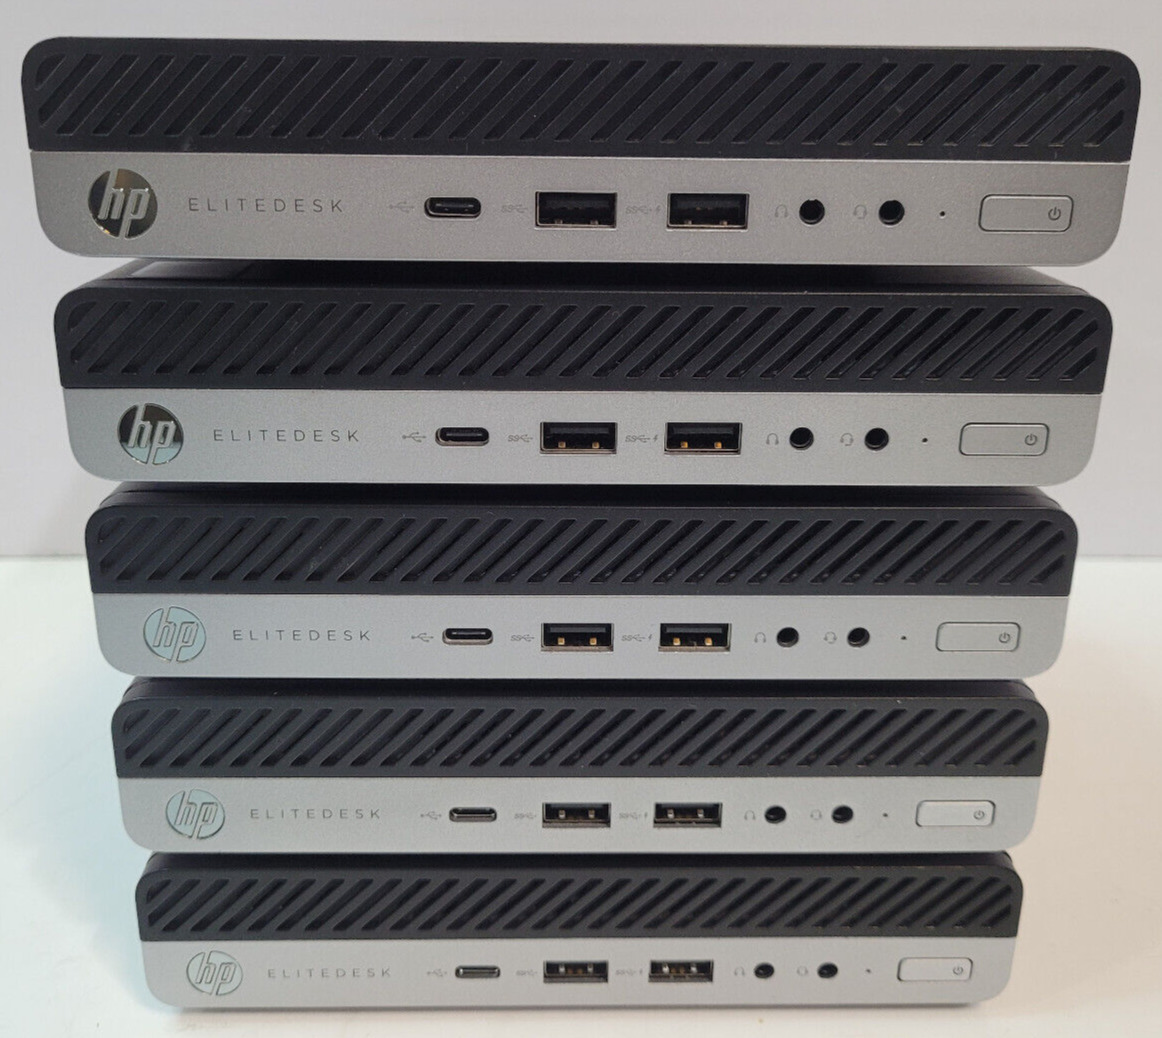 Lot of (5) HP EliteDesk 800 G3 DM Micro PC 2.5GHz Core i5-6500T 8GB RAM No HDDs